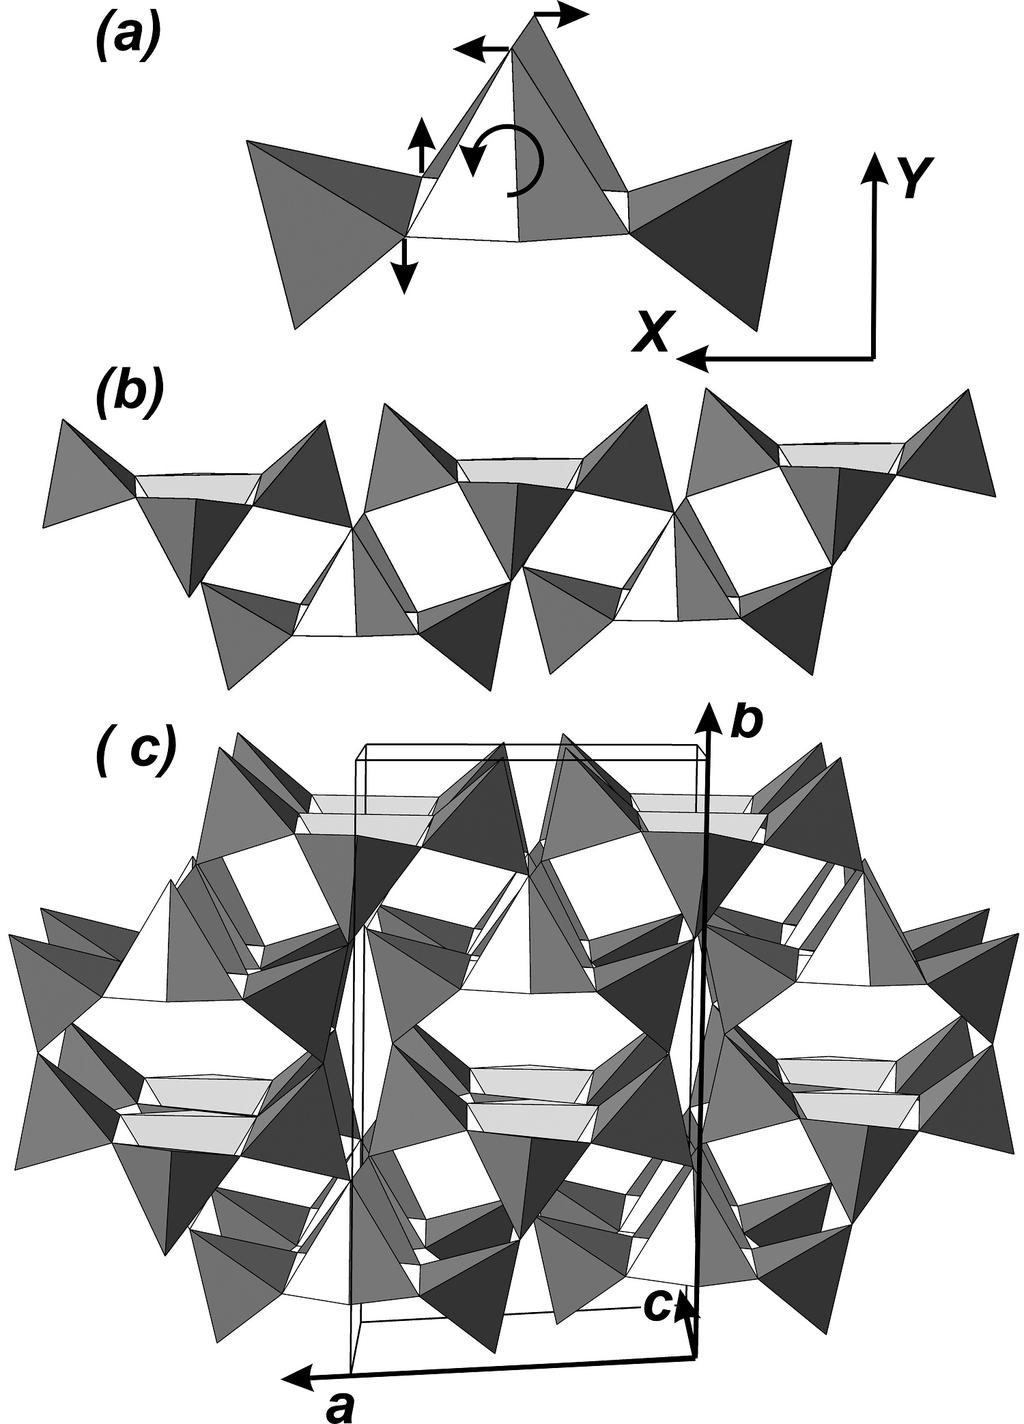 636 637 638 639 640 641 642 643 644 645 646 Figure 1: A polyhedral representation of the components of the alumino-silicate framework of plagioclase feldspars, as illustrated by the structure of